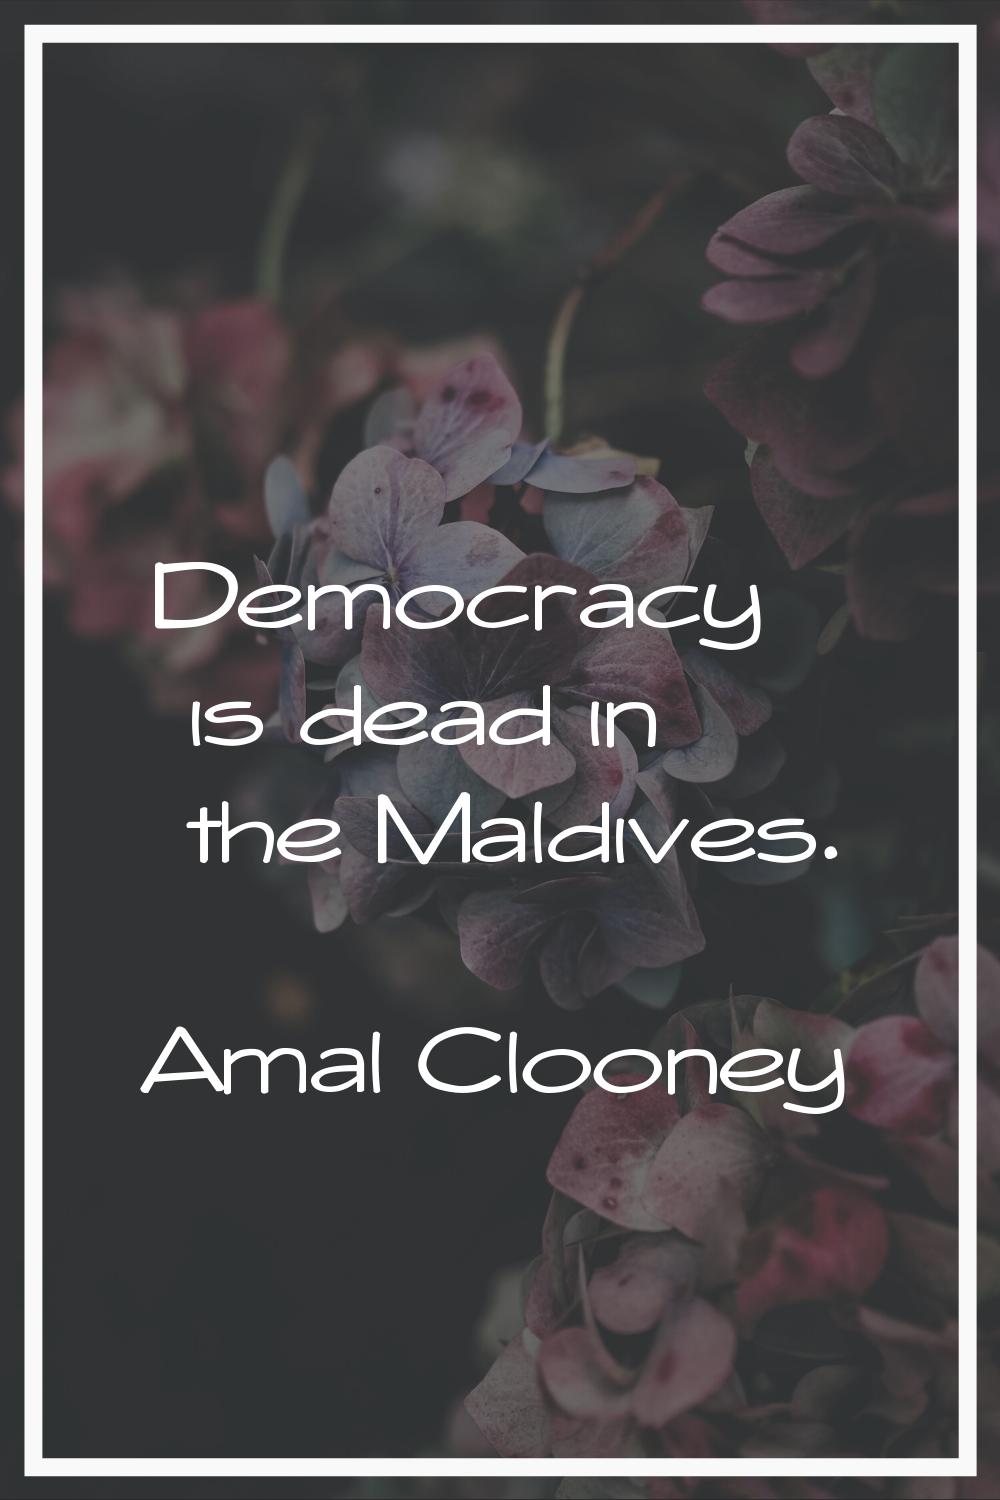 Democracy is dead in the Maldives.